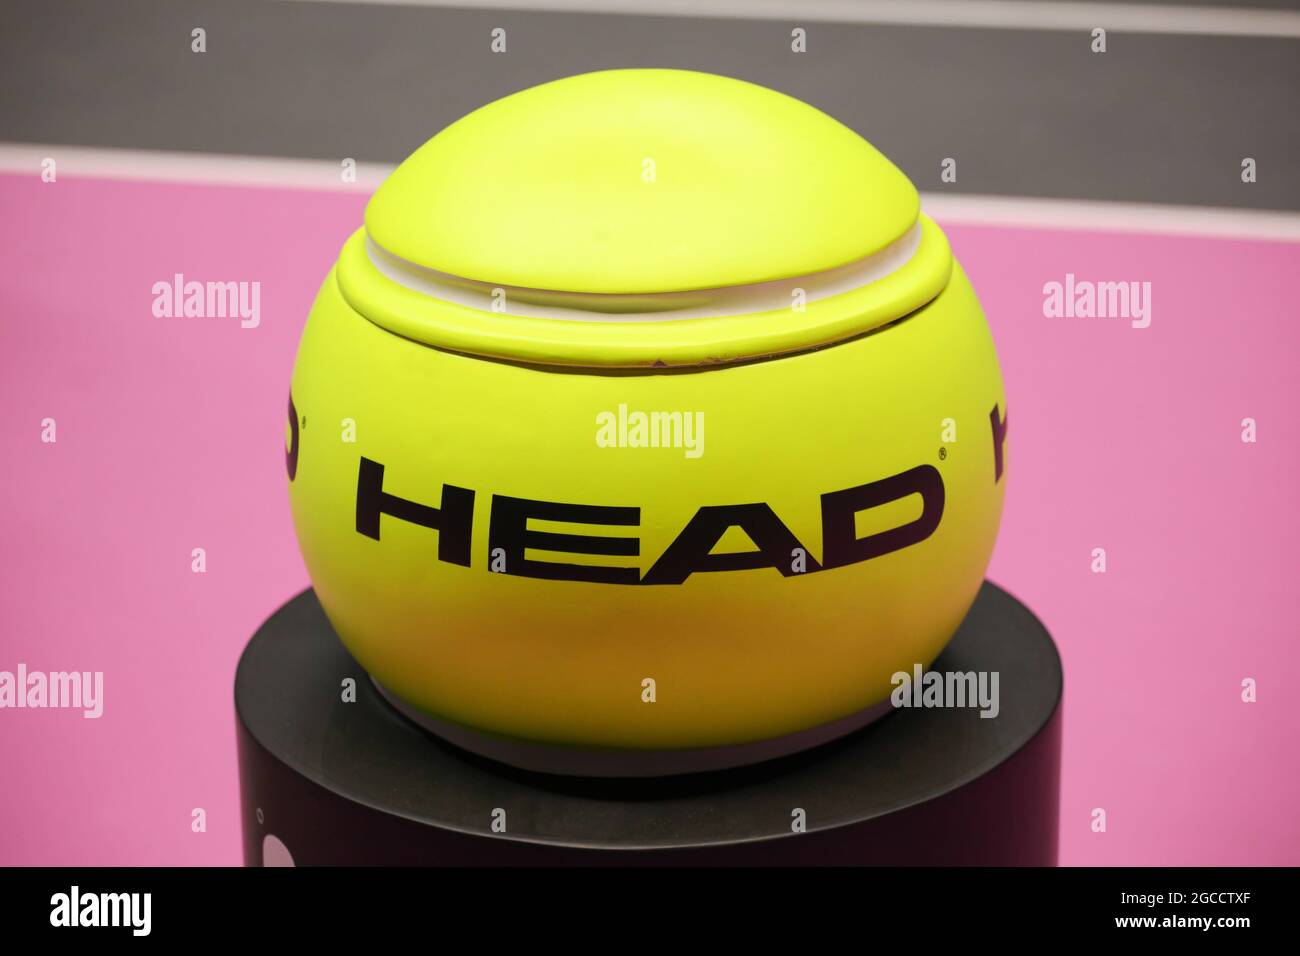 Lyon, France - March 6, 2020: Big head tennis ball. Head is an Austrian company mainly specialized in skiing and tennis Stock Photo